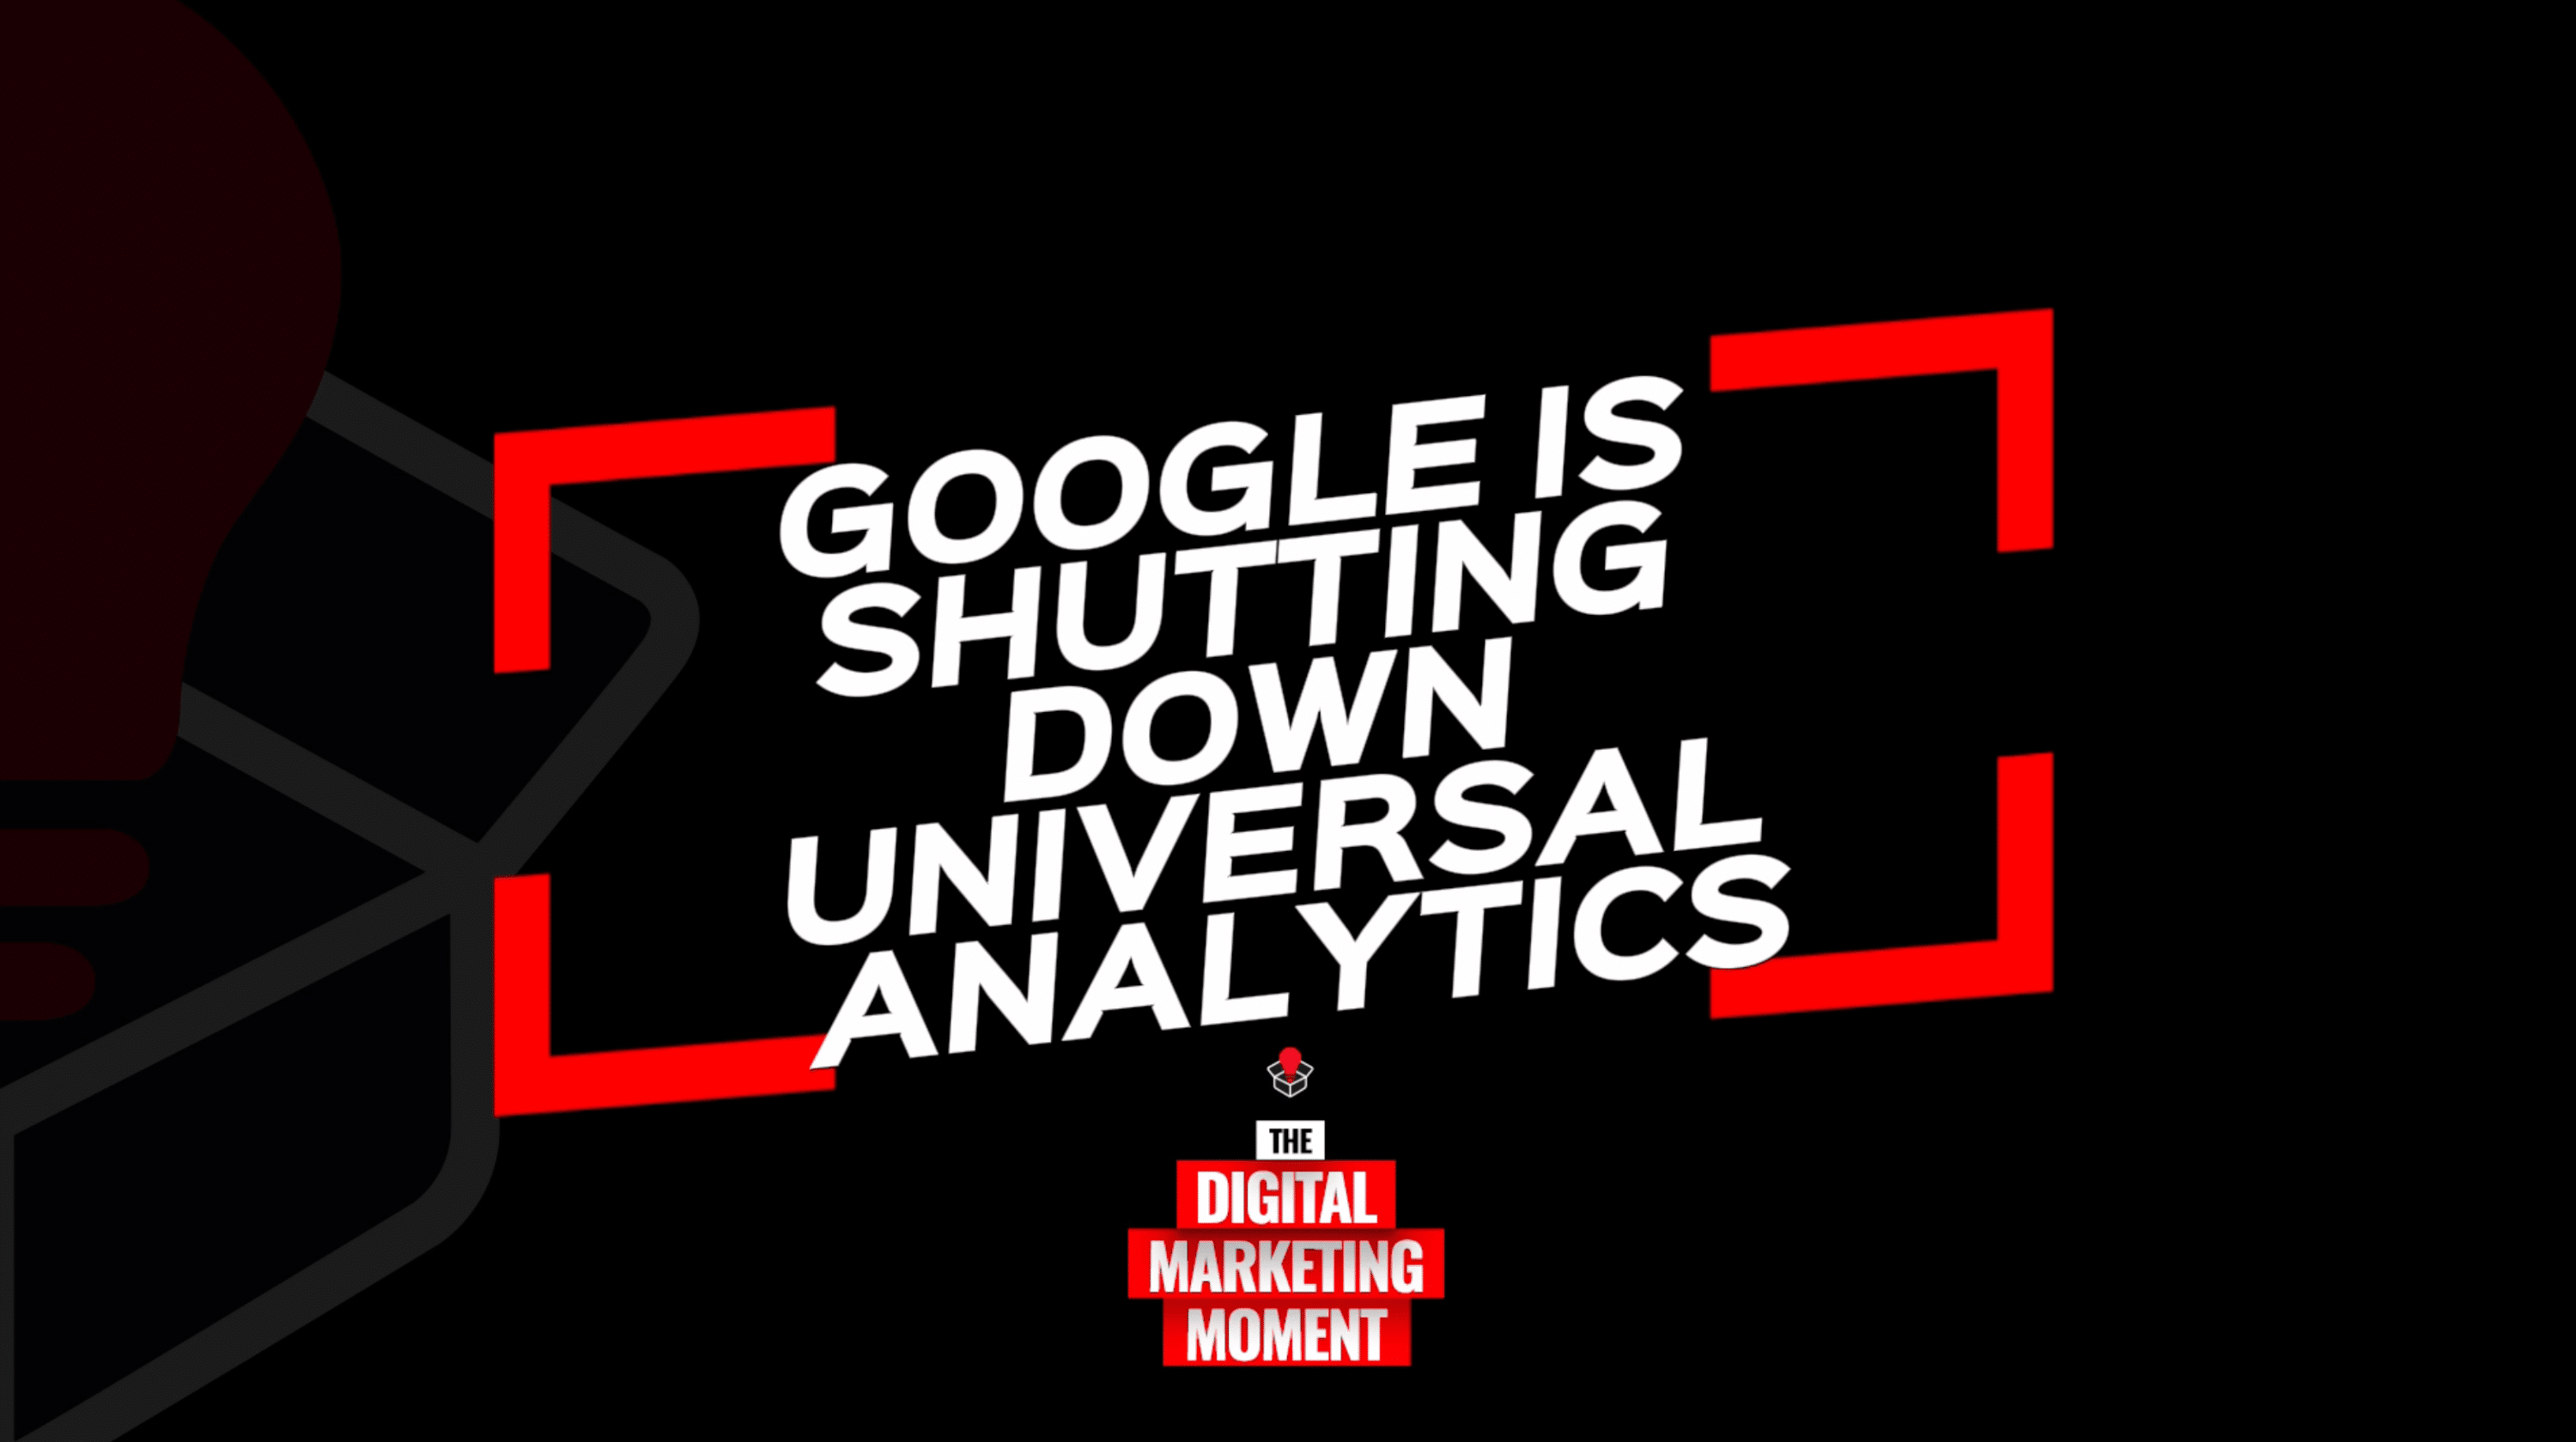 Google Analytics is Shuttering Universal Analytics: What You Need to Know